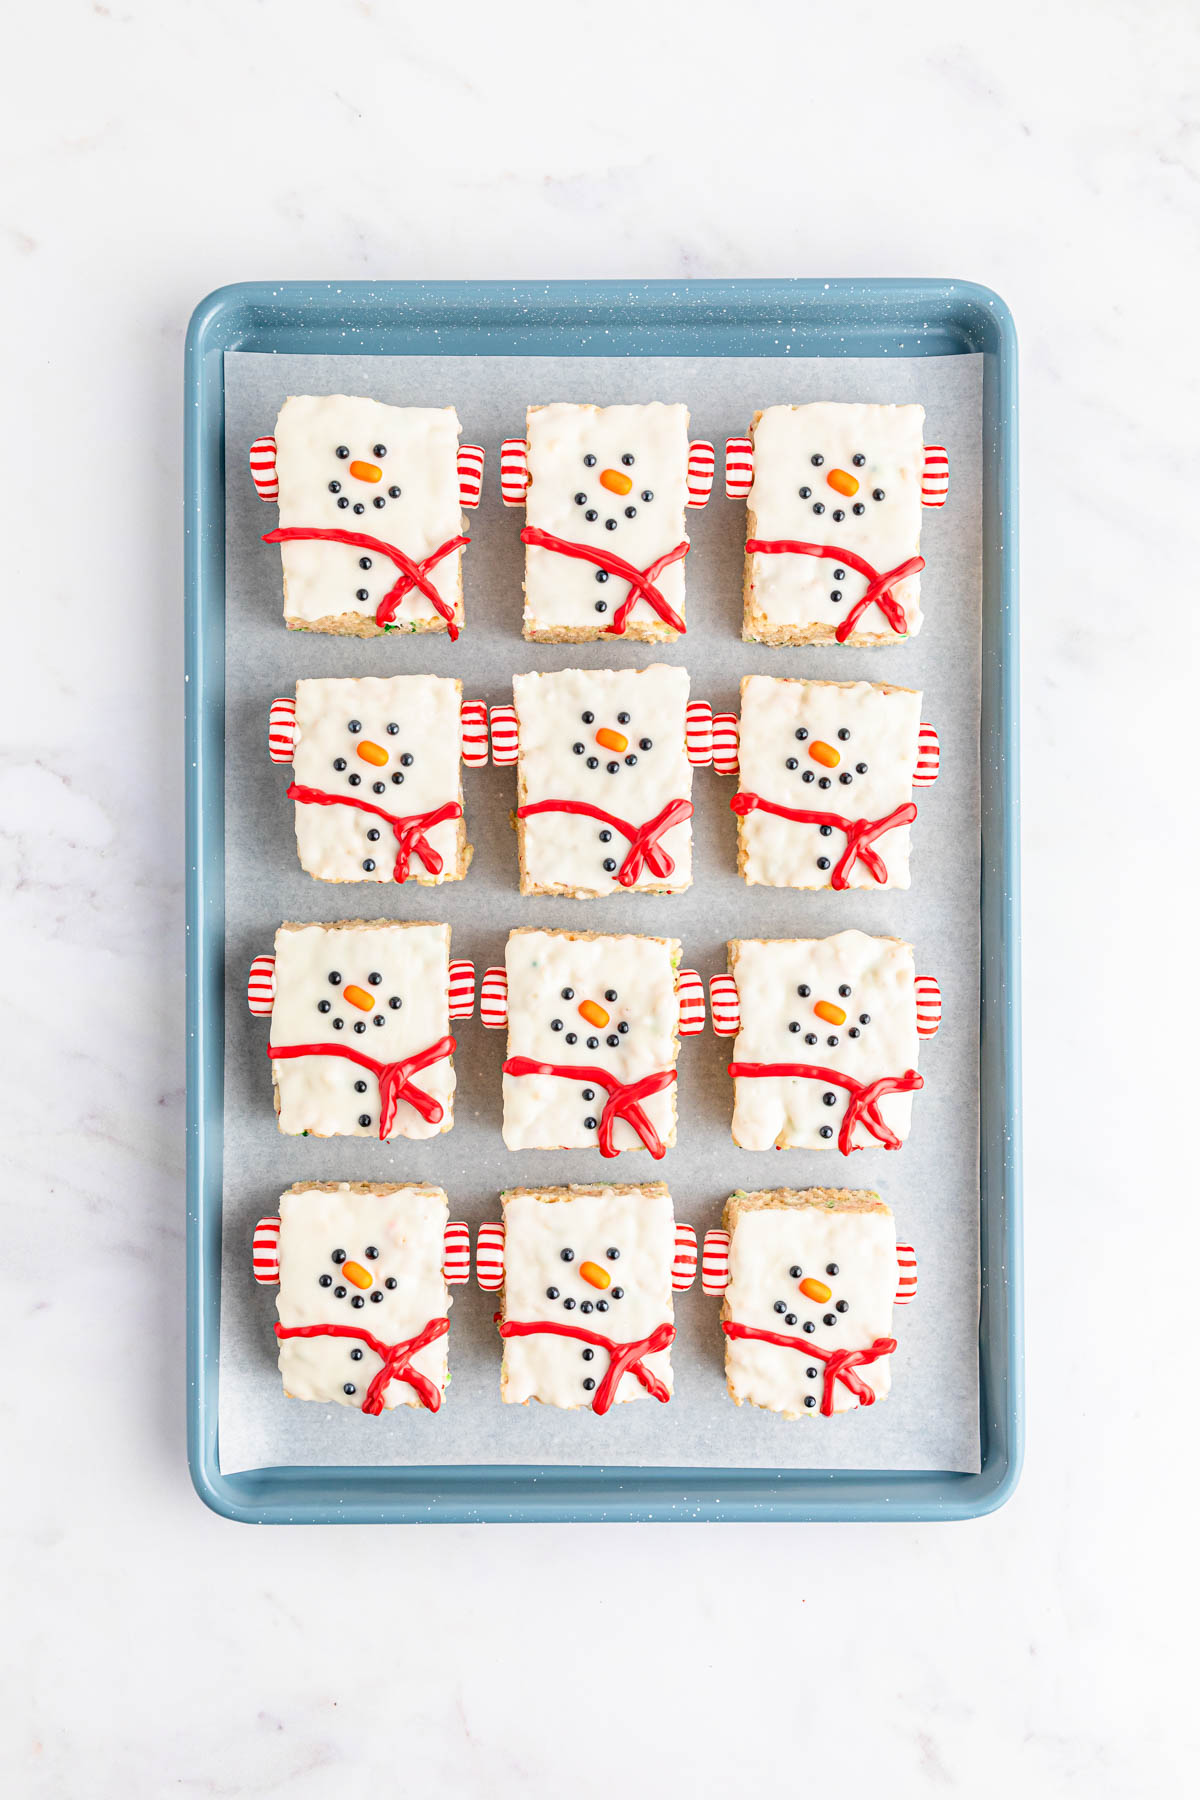 Snowman Rice Krispie treats with red candy scarves on a tray.